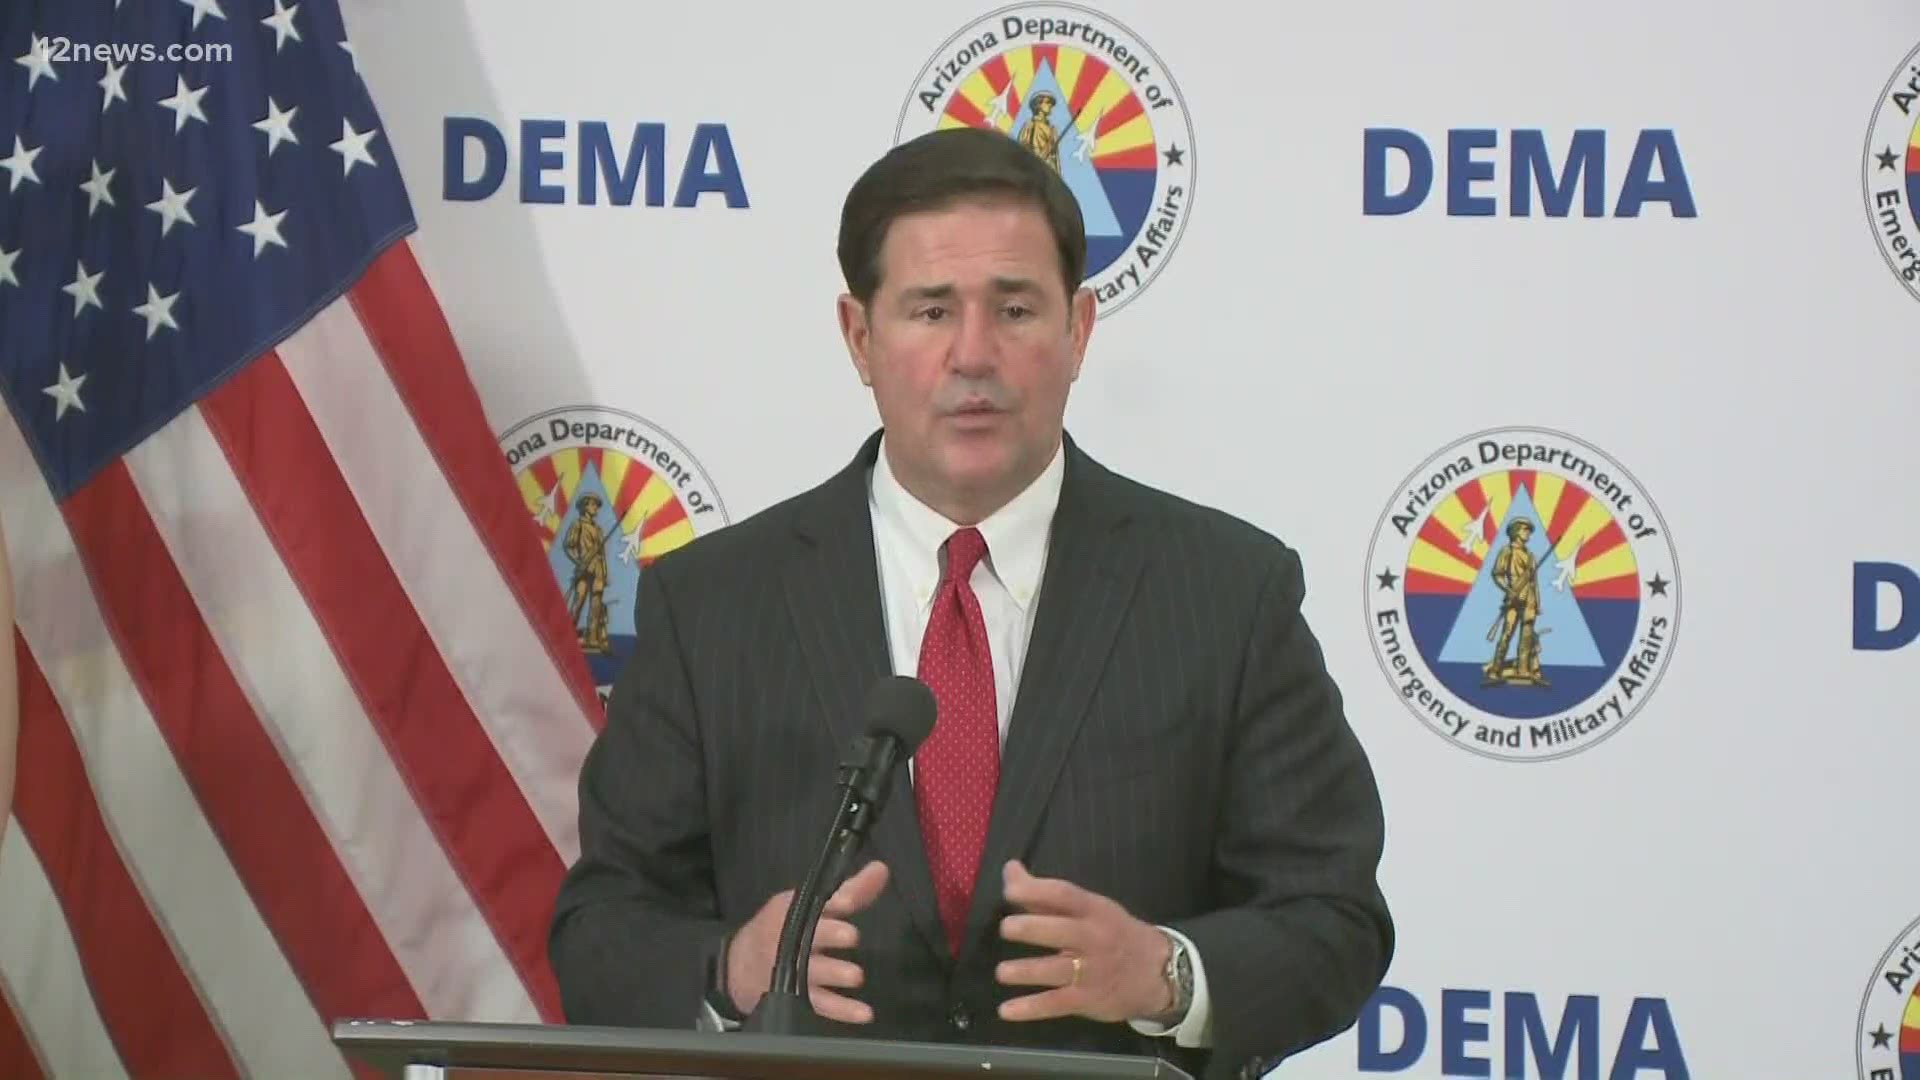 Gov. Ducey addressed schools resuming in-person learning despite no counties in Arizona meeting health benchmarks at a press conference on Thursday.